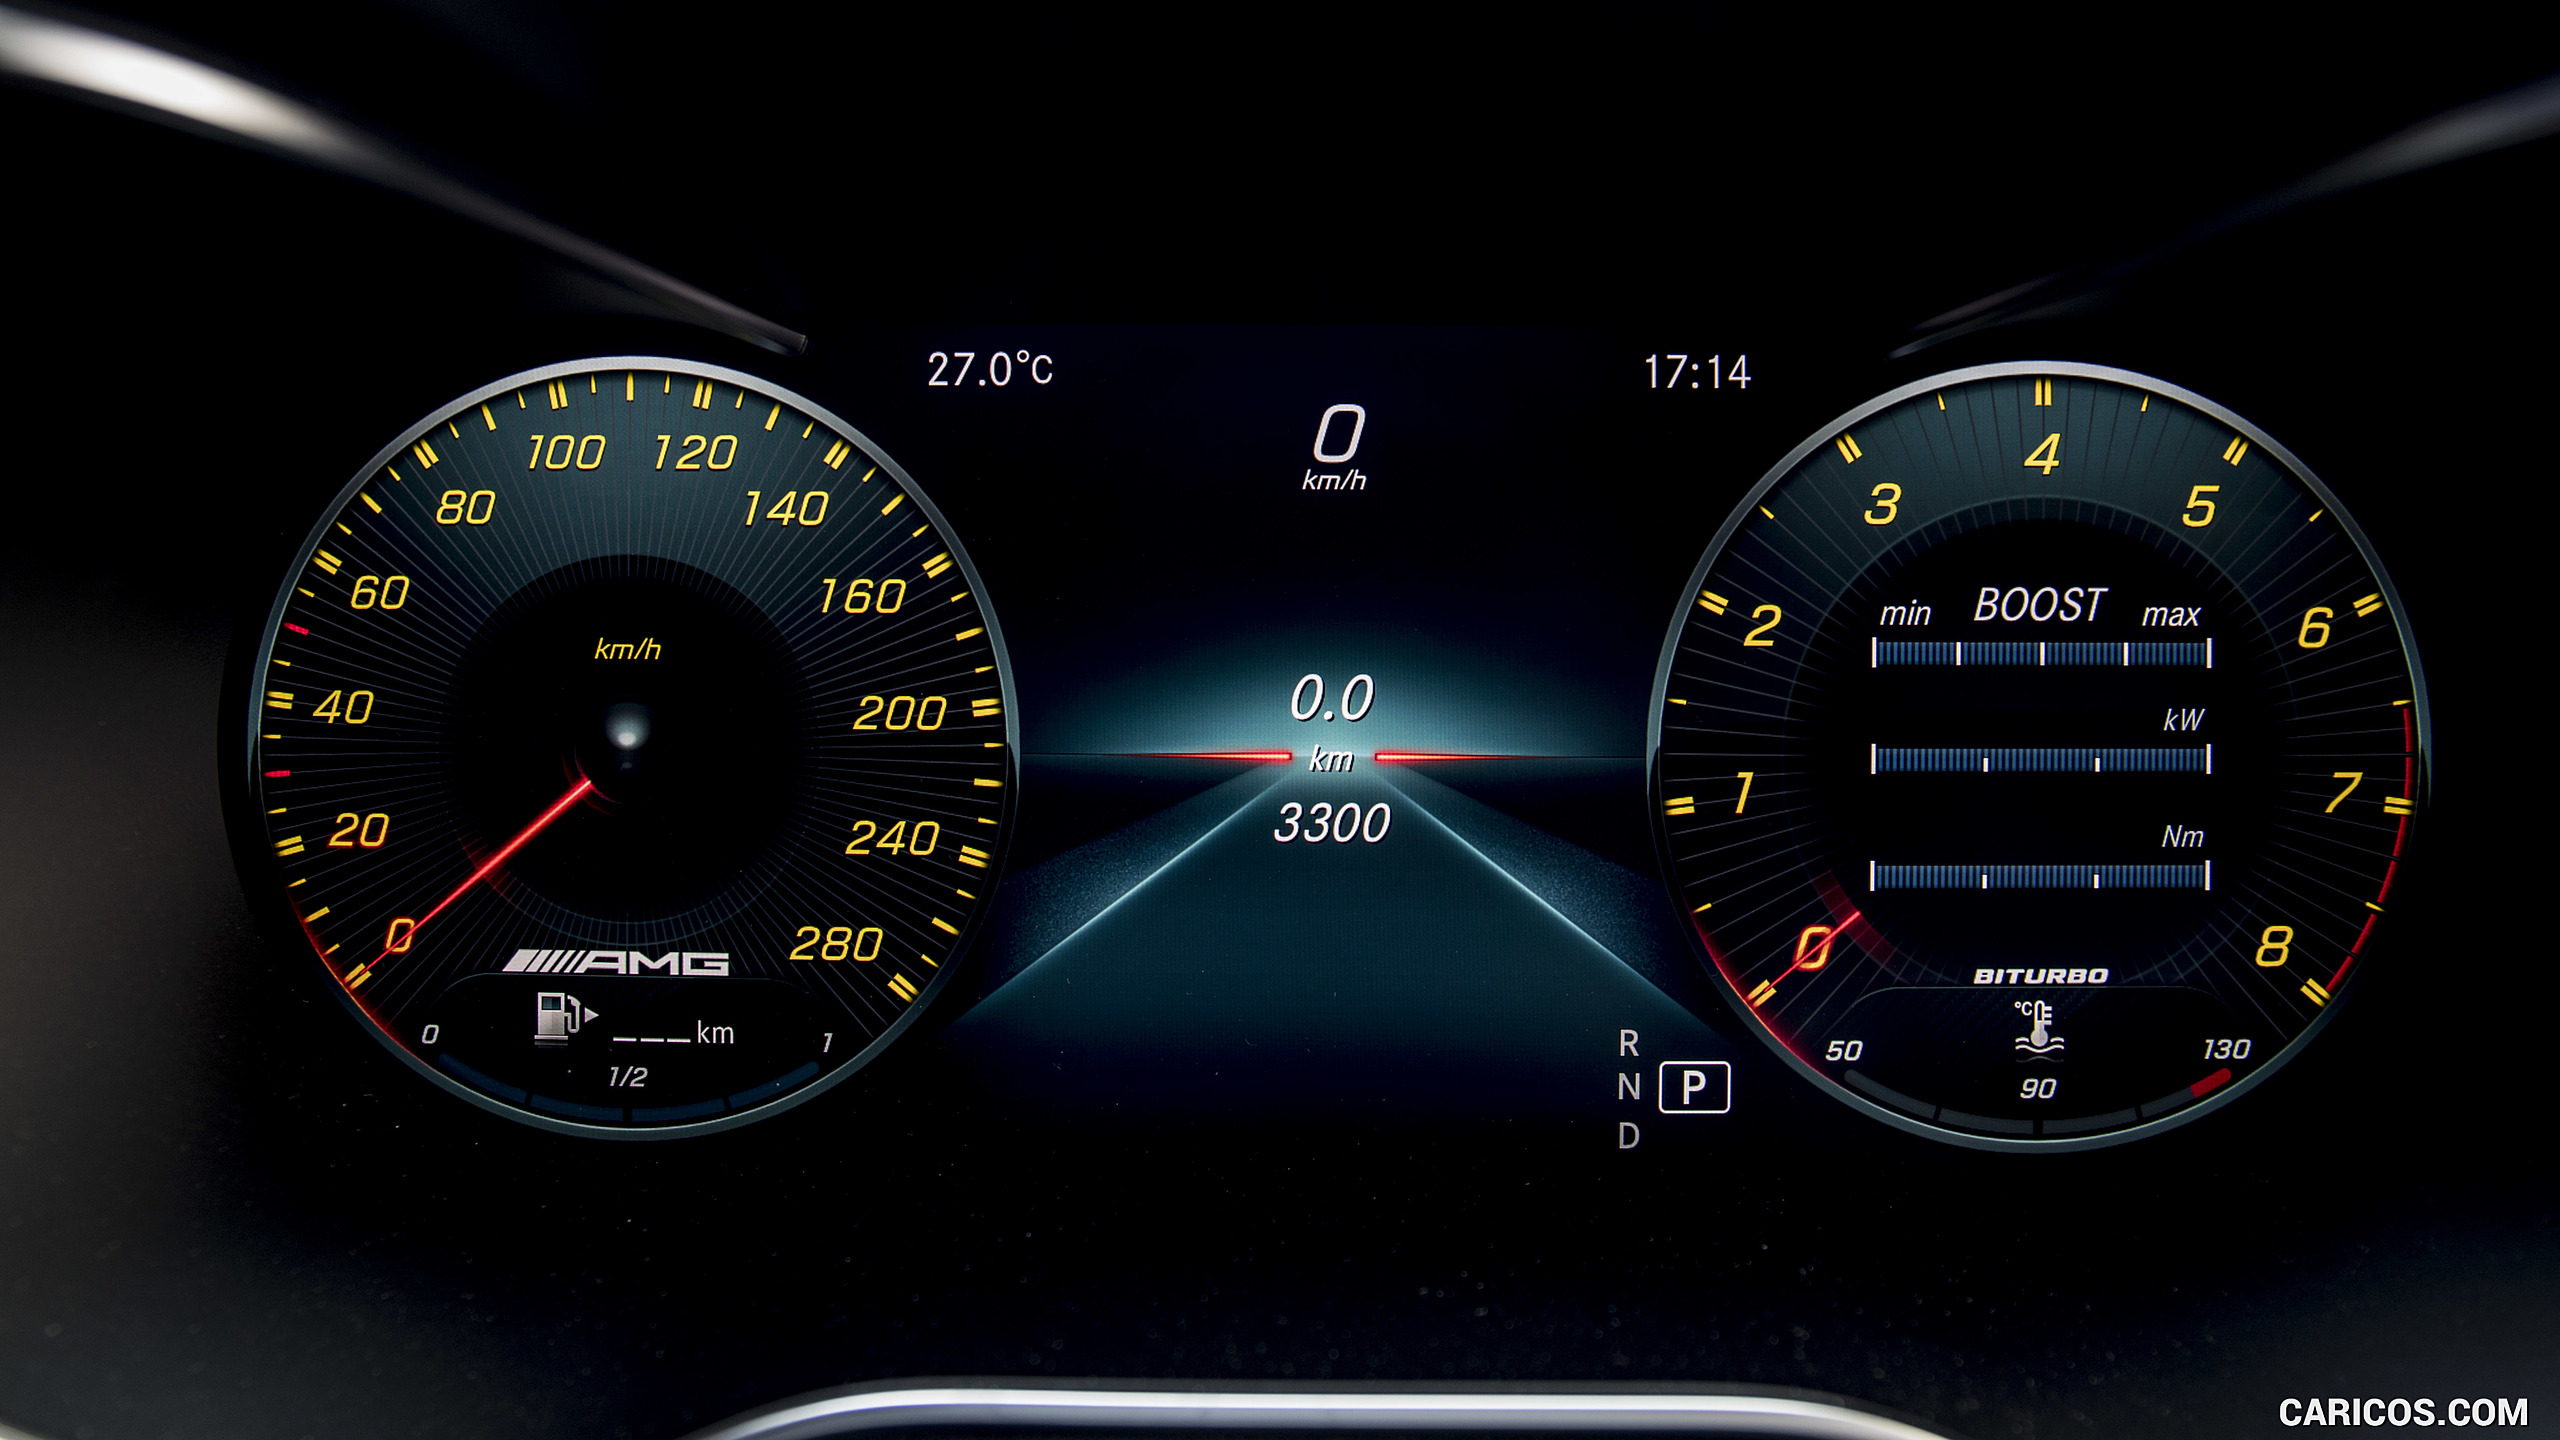 2019 Mercedes-AMG C43 4MATIC Coupe - Digital Instrument Cluster, #108 of 184